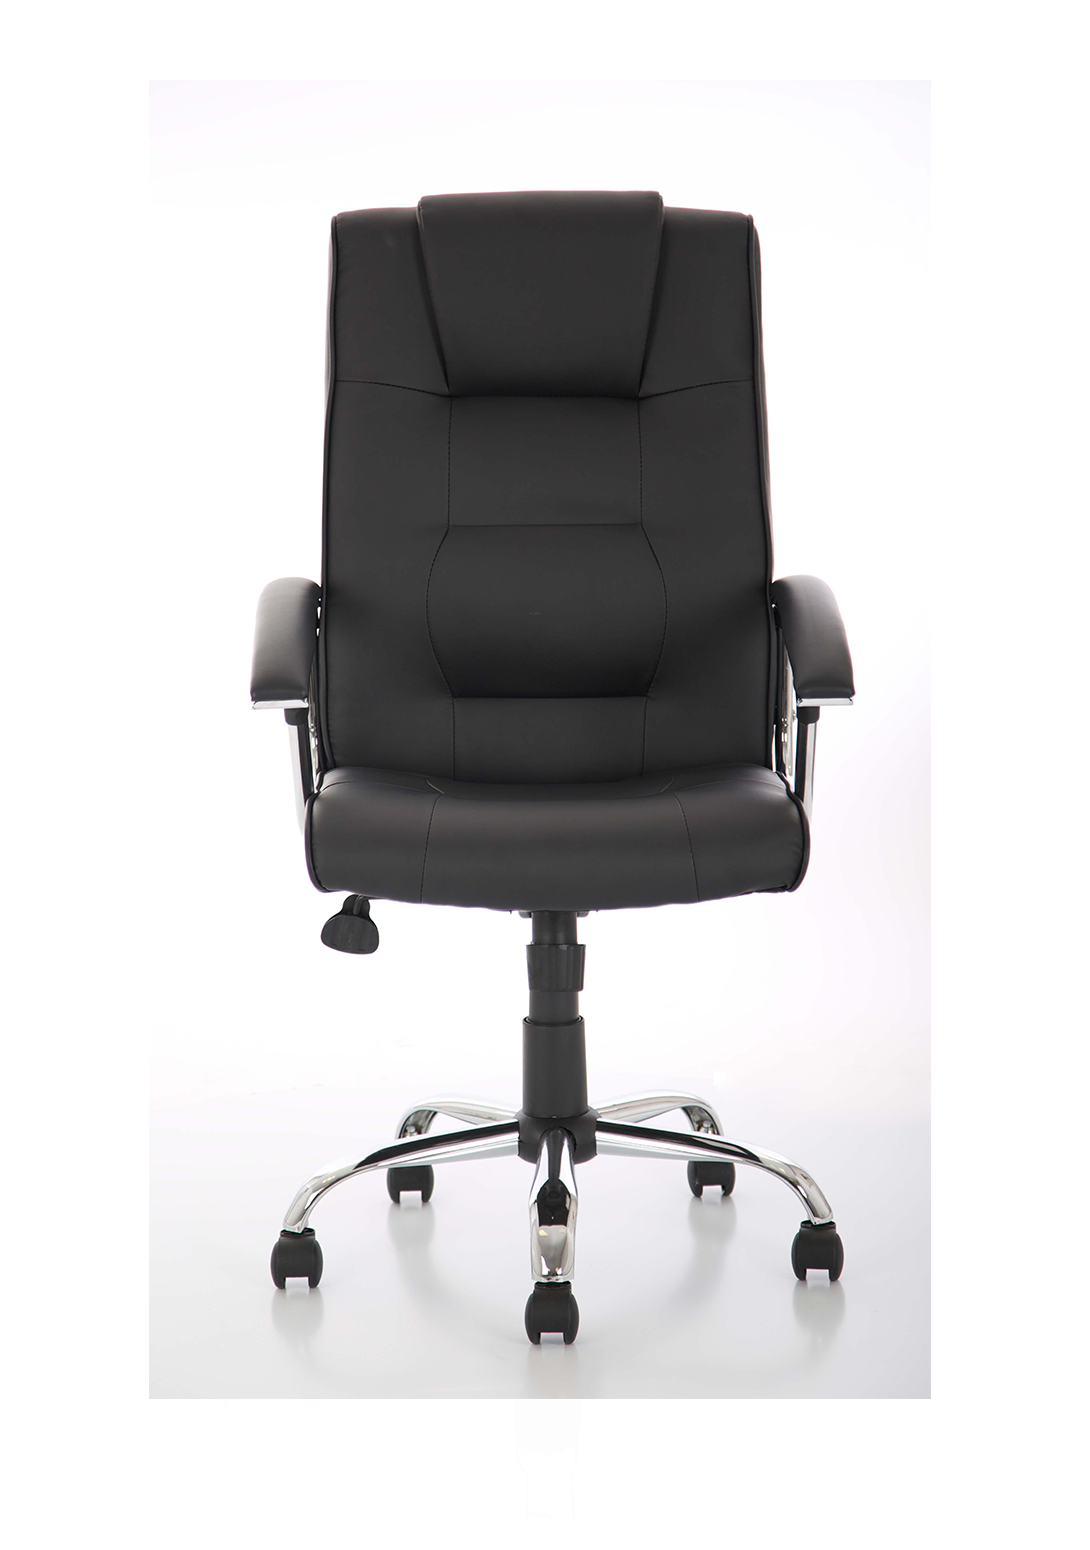 Thrift Exec Home Office Chair | Executive Chair | Home Office Furniture | Leather Executive Chair | Leather Swivel Chair | Swivel Chair